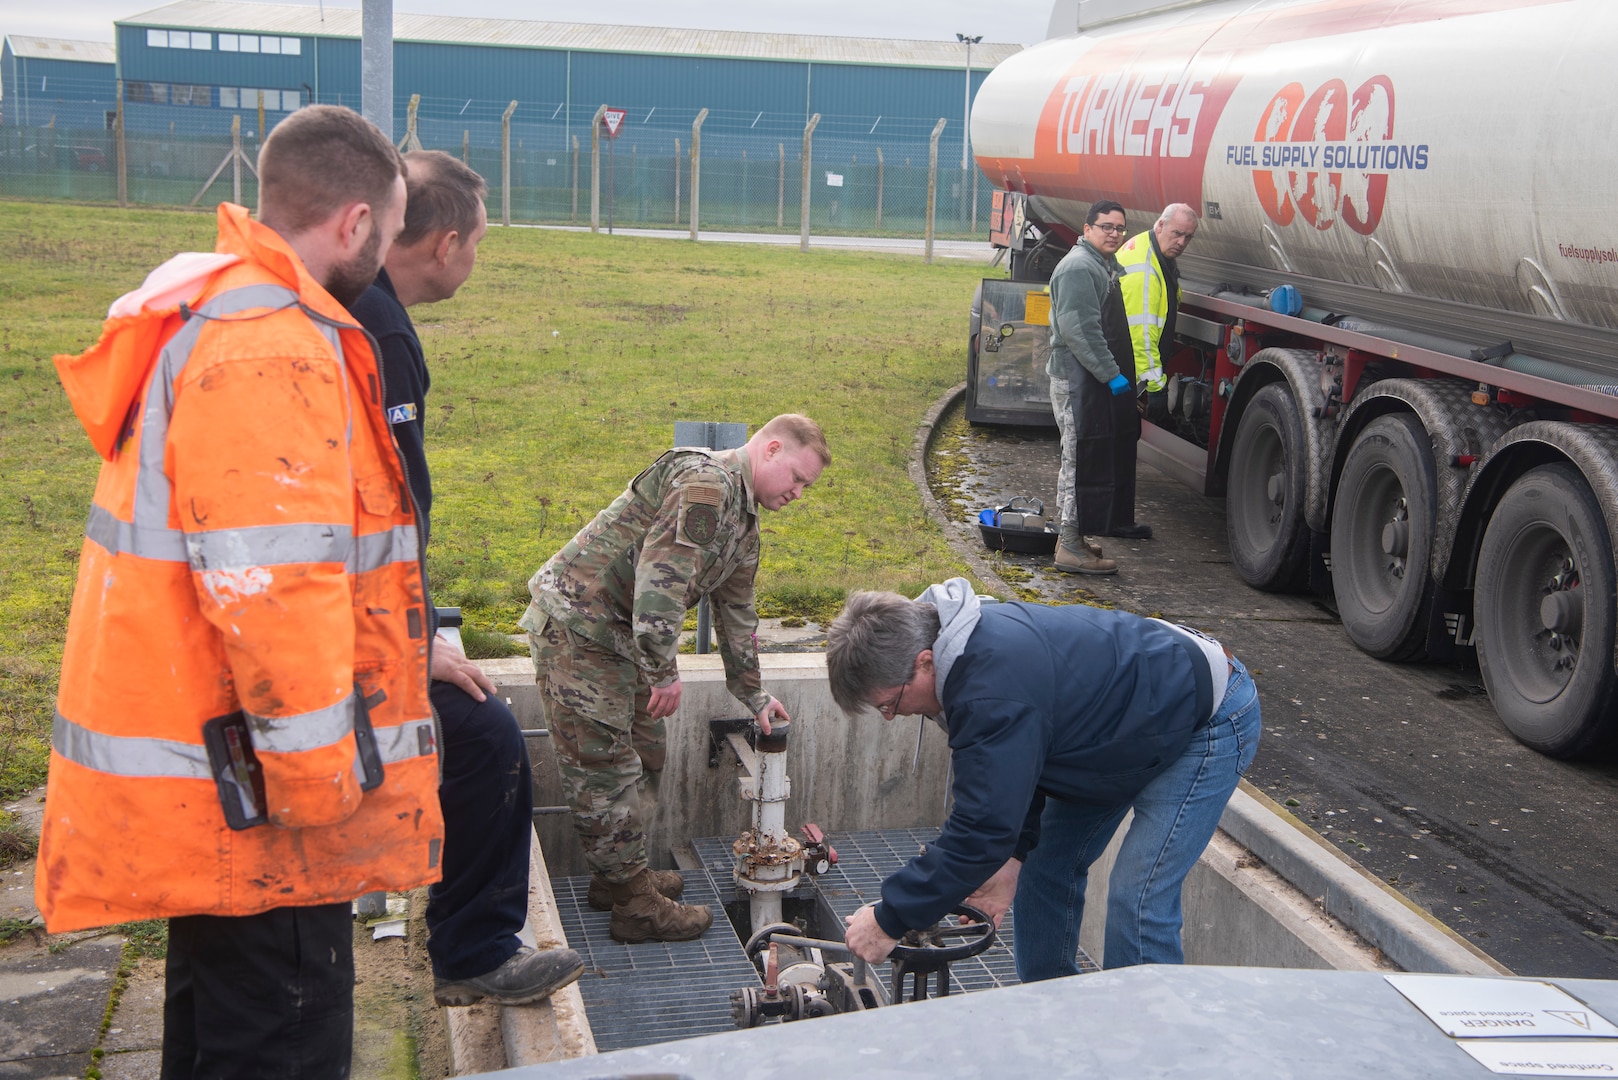 Master Sgt. Joseph Feiss, 100th Logistics Readiness Squadron noncommissioned officer in charge of fuels environmental safety office, and Alan VanDriesen, Maytag Aircraft Corporation terminal superintendent, open the valve to storage facilities Jan. 27, 2020, at RAF Mildenhall, England. The pipes must be opened to allow fuel to flow from the tanker truck into the underground tanks. (U.S. Air Force photo by Airman 1st Class Joseph Barron)